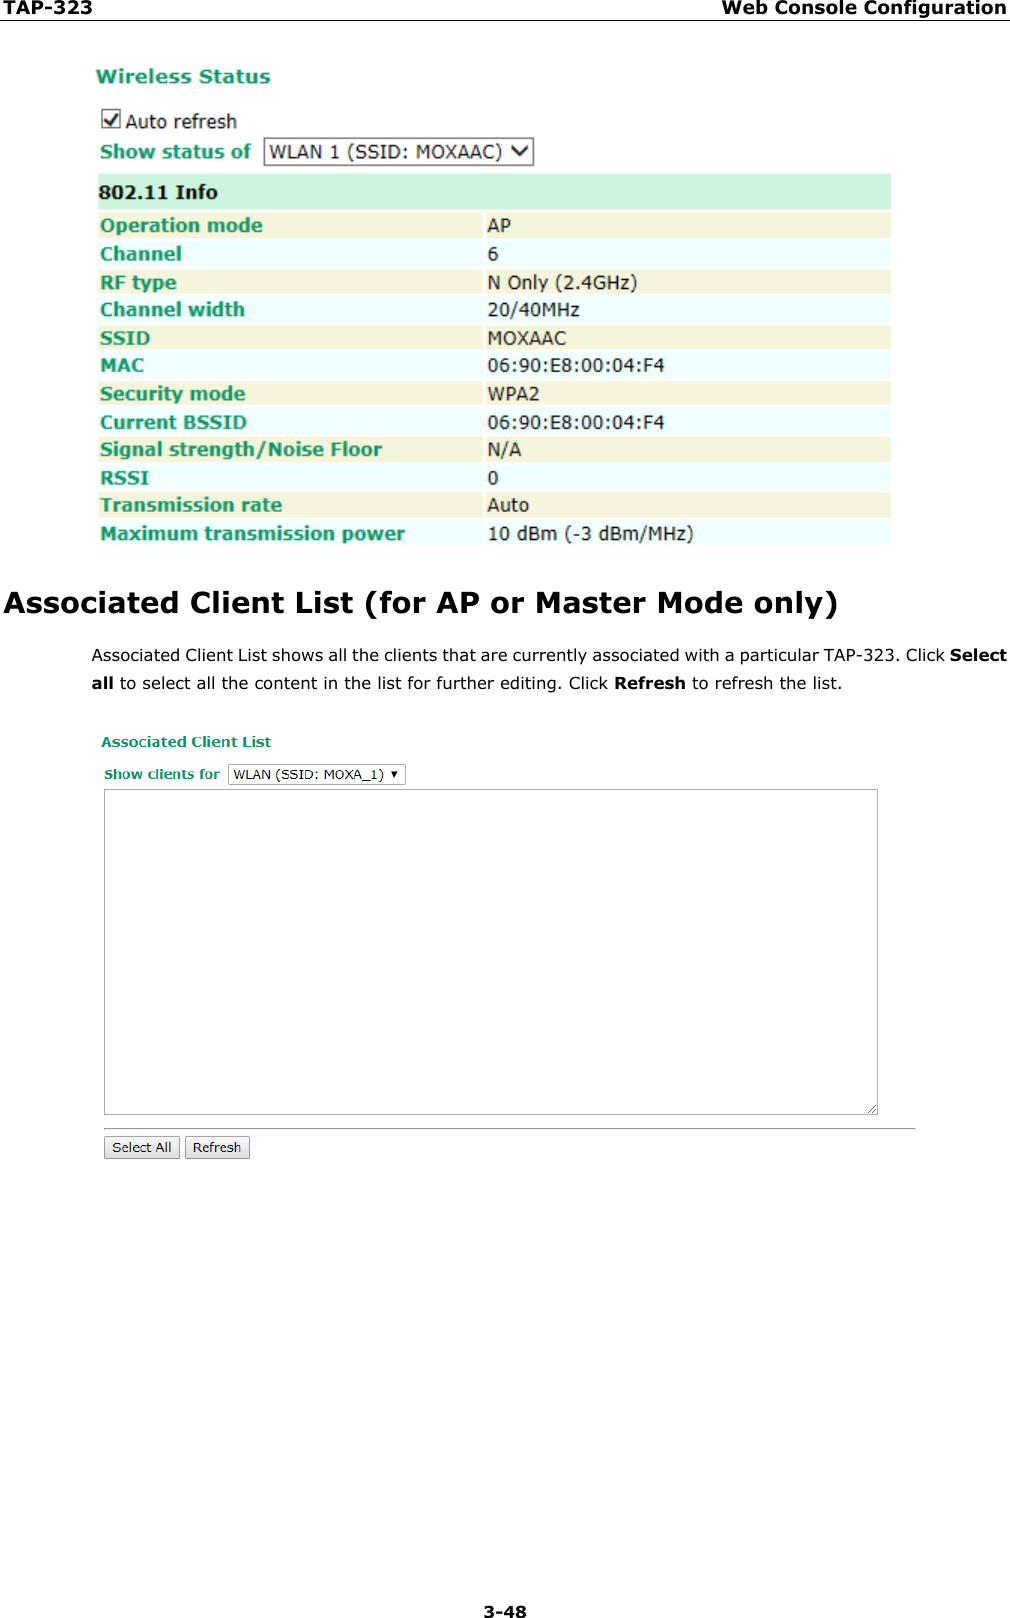 TAP-323 Web Console Configuration  3-48  Associated Client List (for AP or Master Mode only) Associated Client List shows all the clients that are currently associated with a particular TAP-323. Click Select all to select all the content in the list for further editing. Click Refresh to refresh the list.         